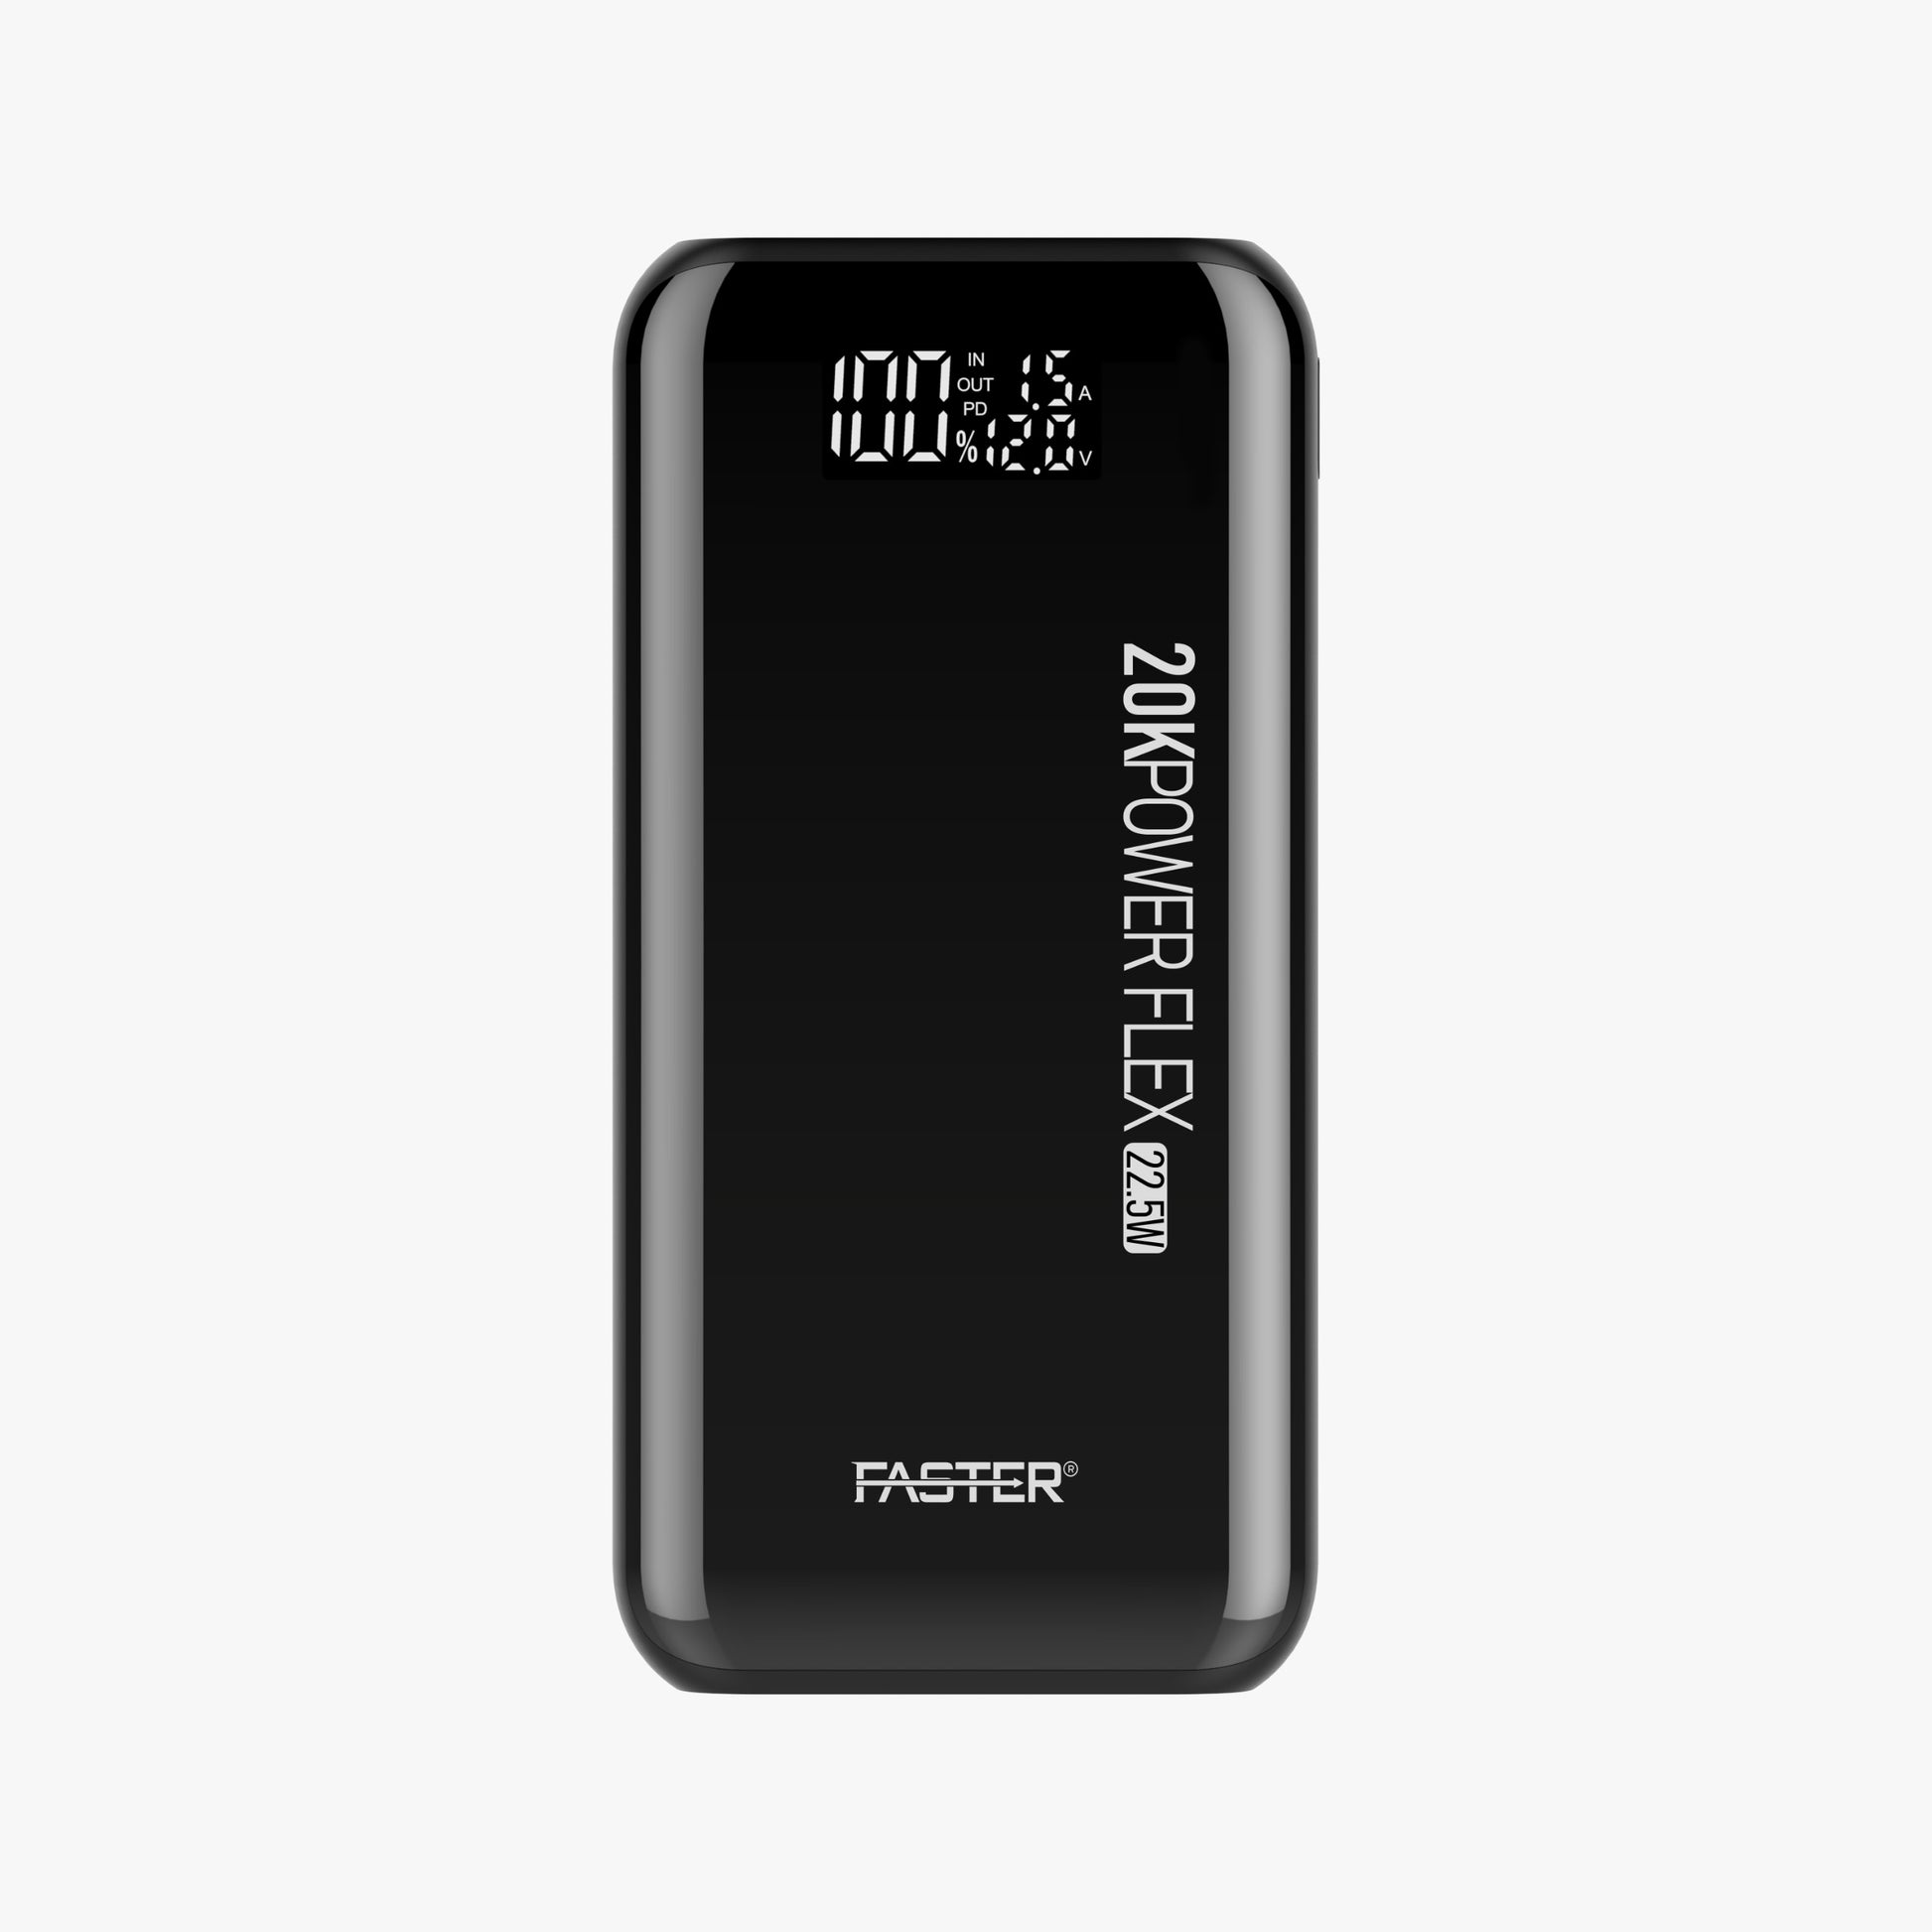 A front side view of Faster Powerbank 20000mAh on white background